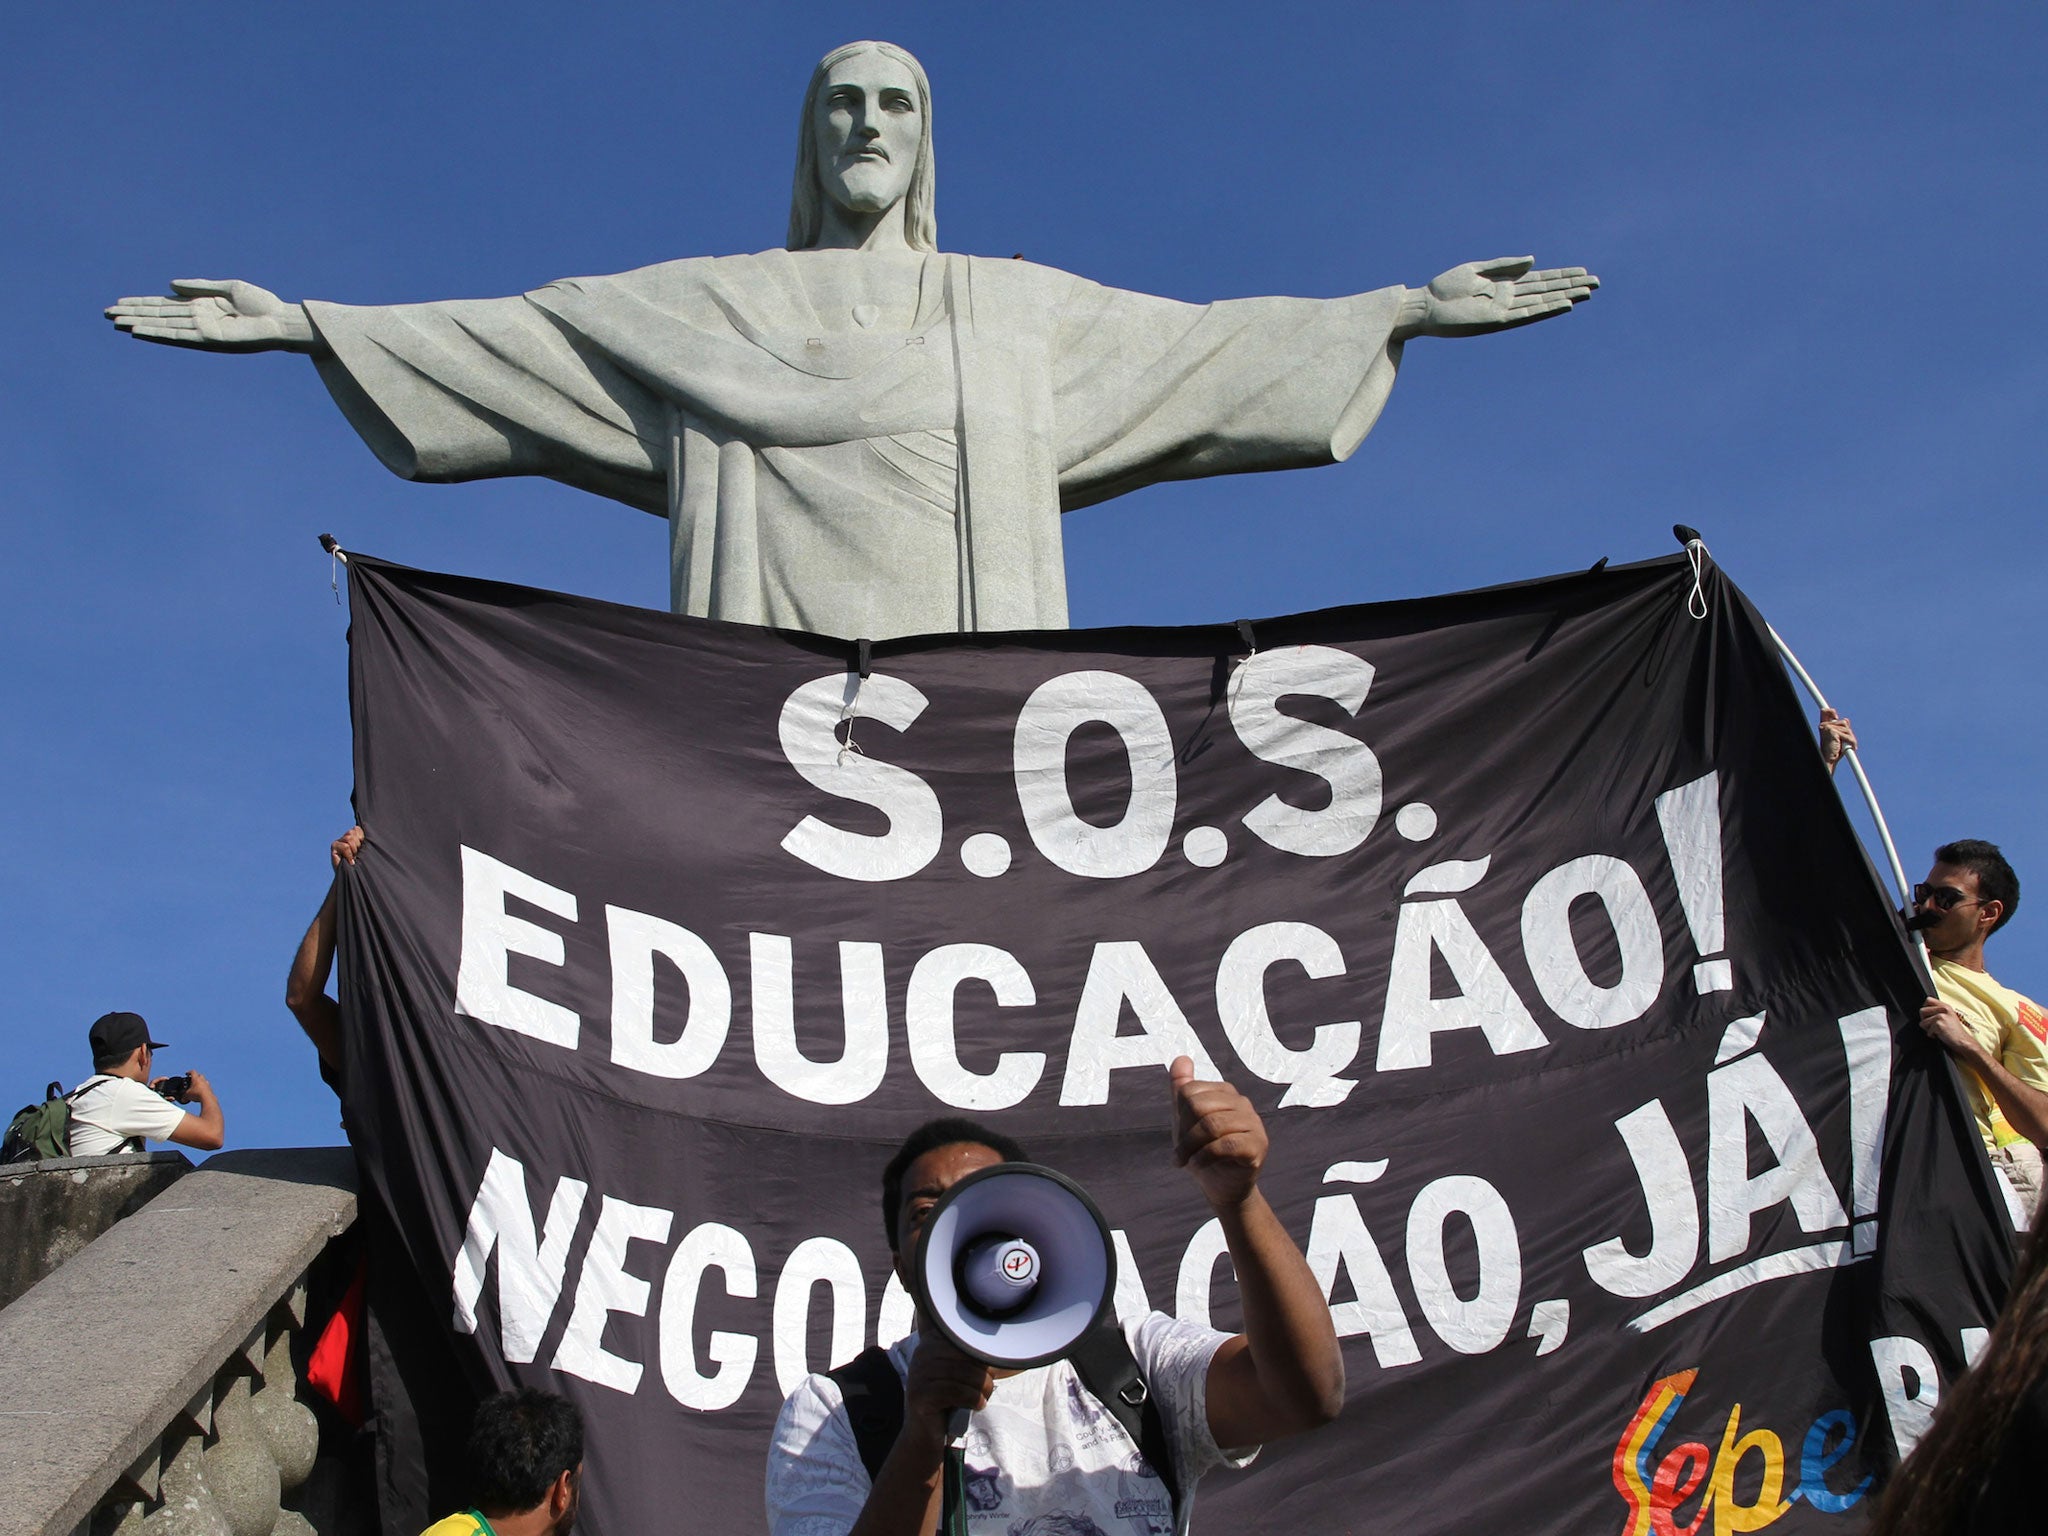 Brazilian protesters take over the Cristo Redentor statue viewing platform in Corcovado, Rio de Janeiro. The protestors ask for improved funding for public education instead of expenditures in athletic events